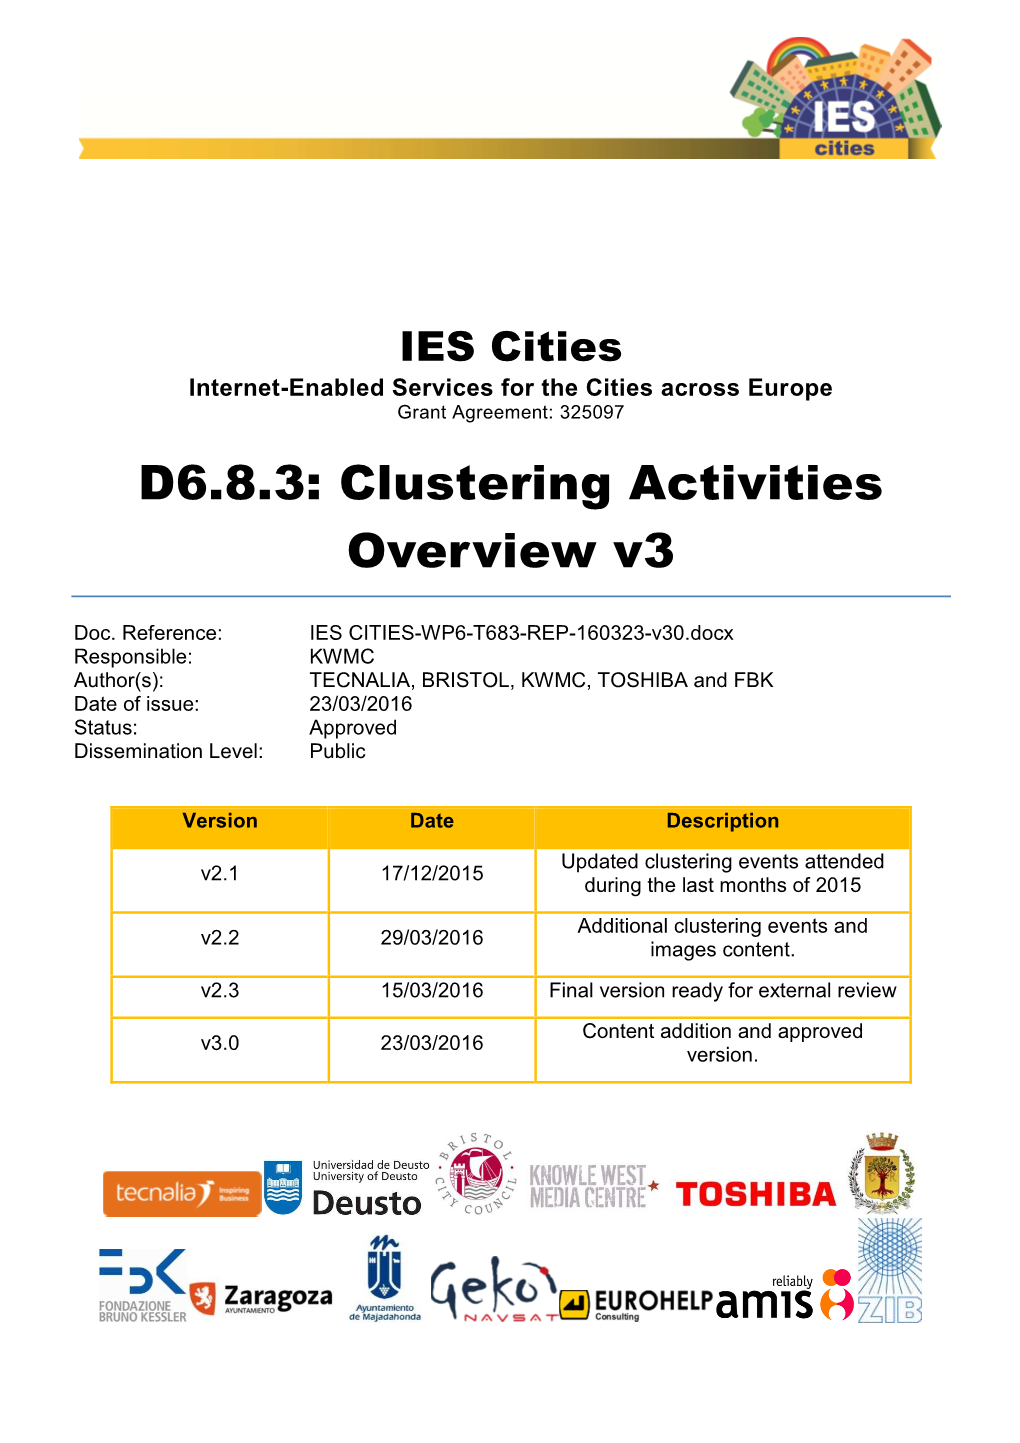 IES CITIES-WP6-T683-REP-160323-V30